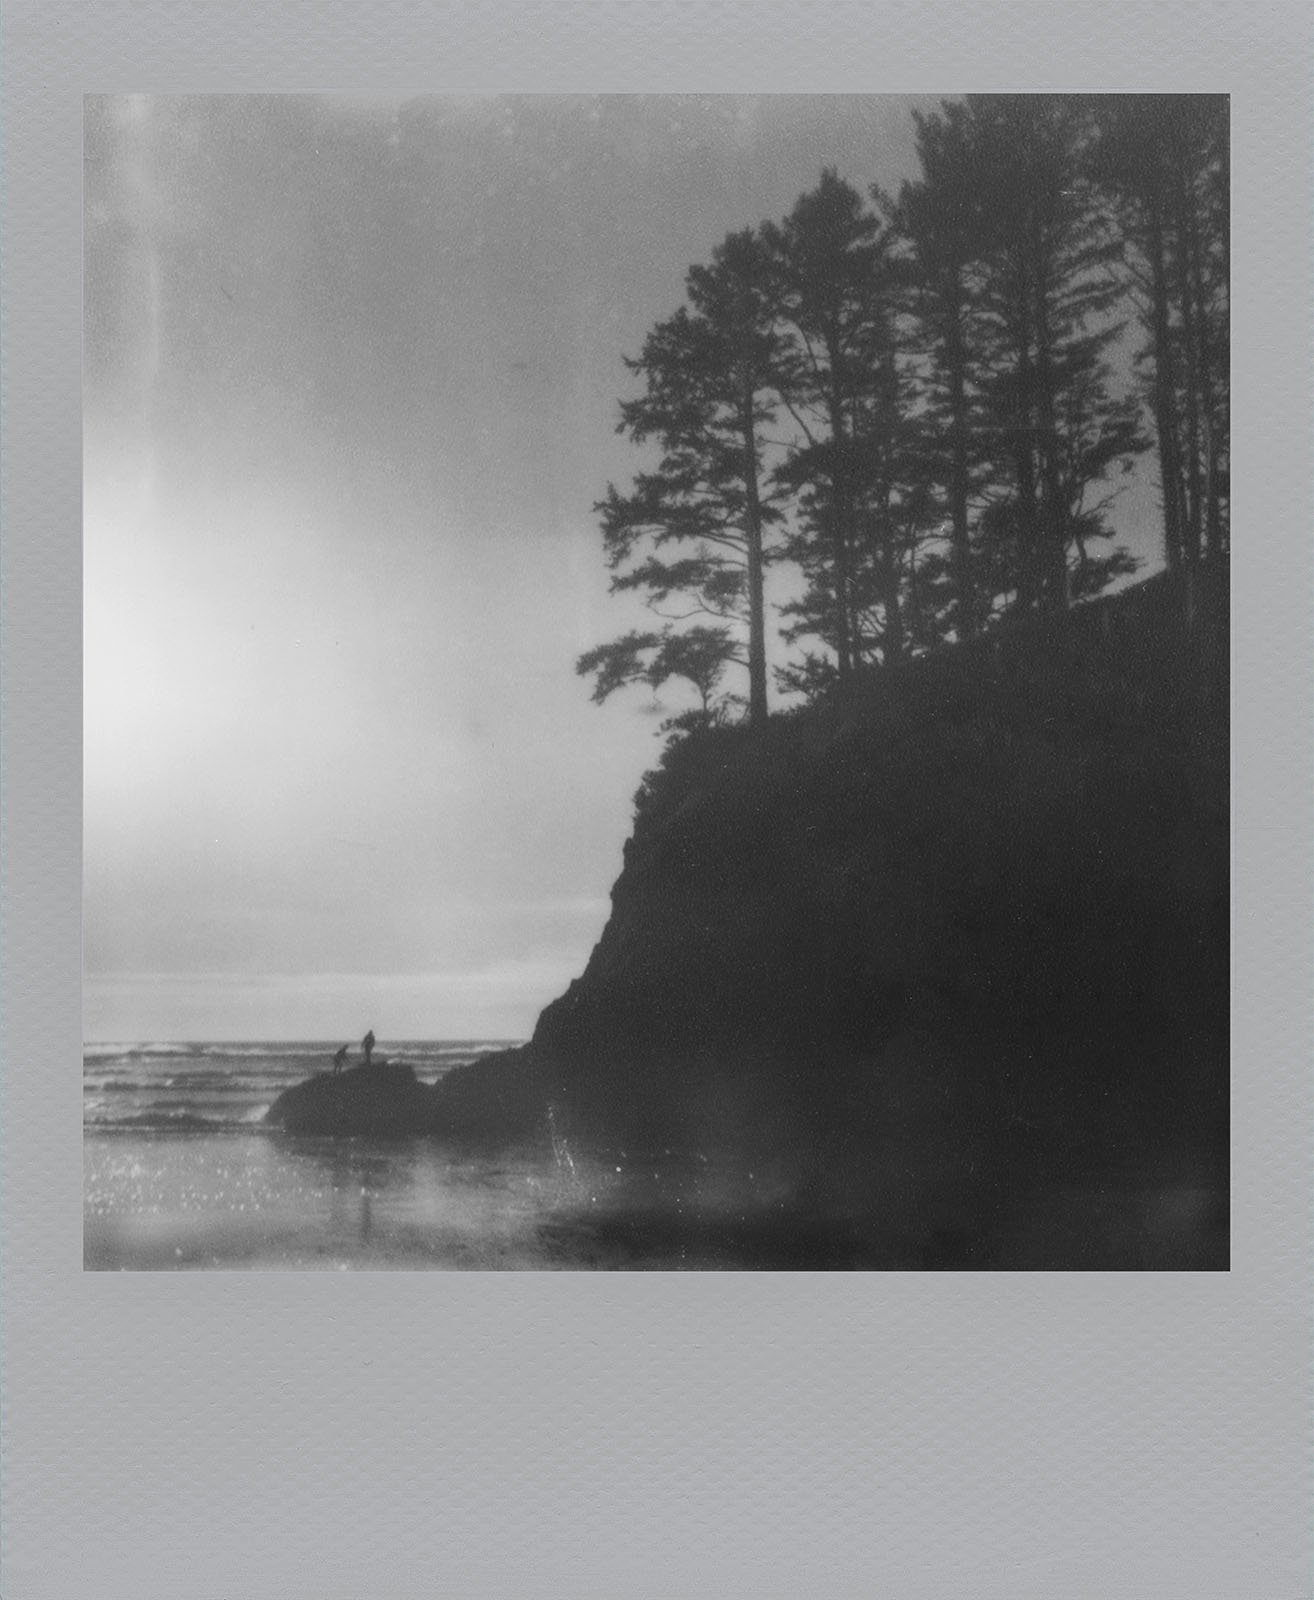 Black and white image of a tranquil beach scene with a silhouette of a lone surfer walking on the shore, a cliff with tall trees to the right, and reflective water in the foreground.